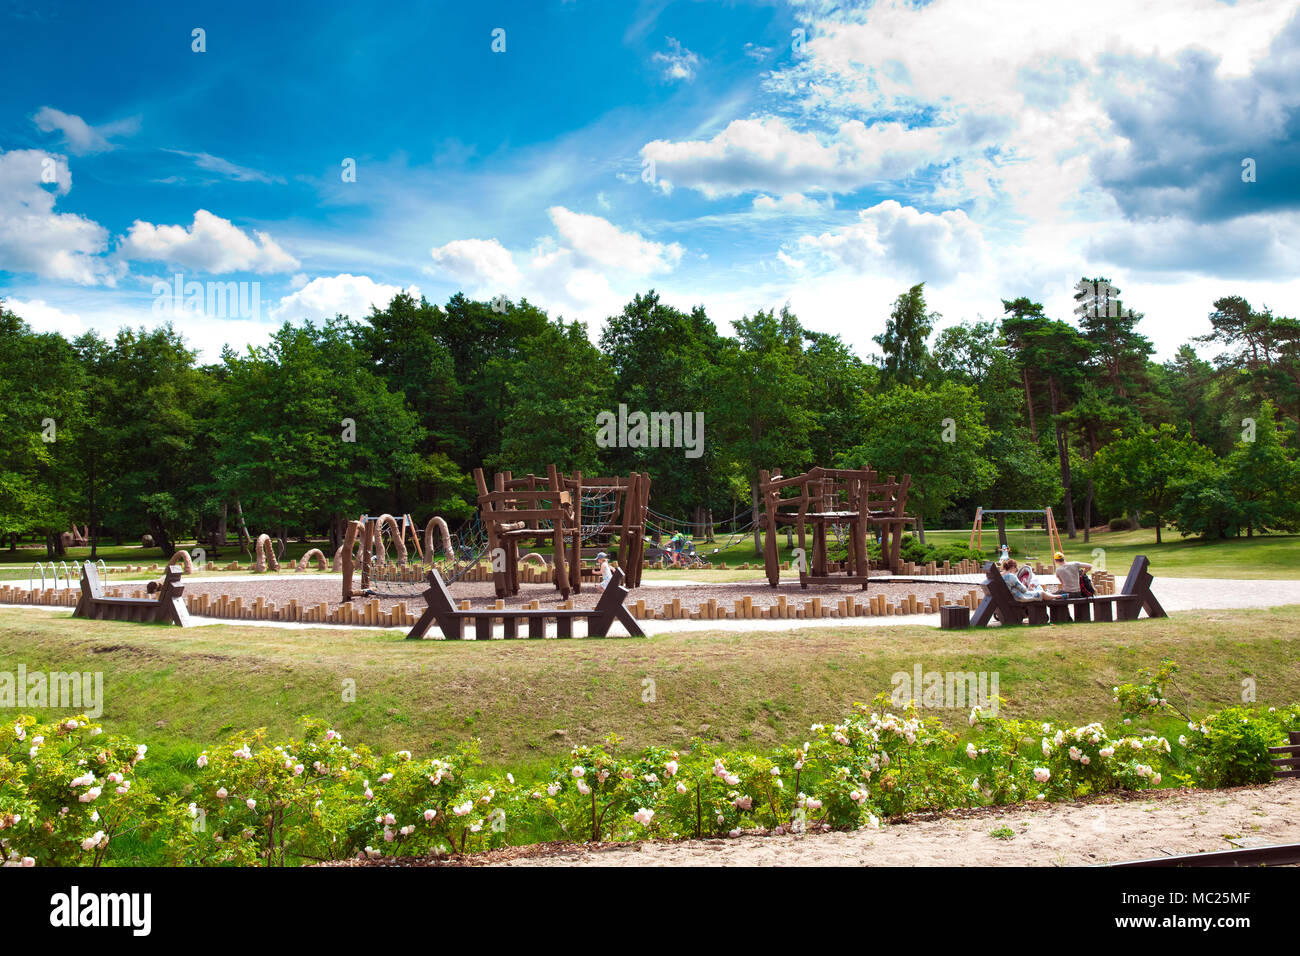 Ecological wooden playground Stock Photo